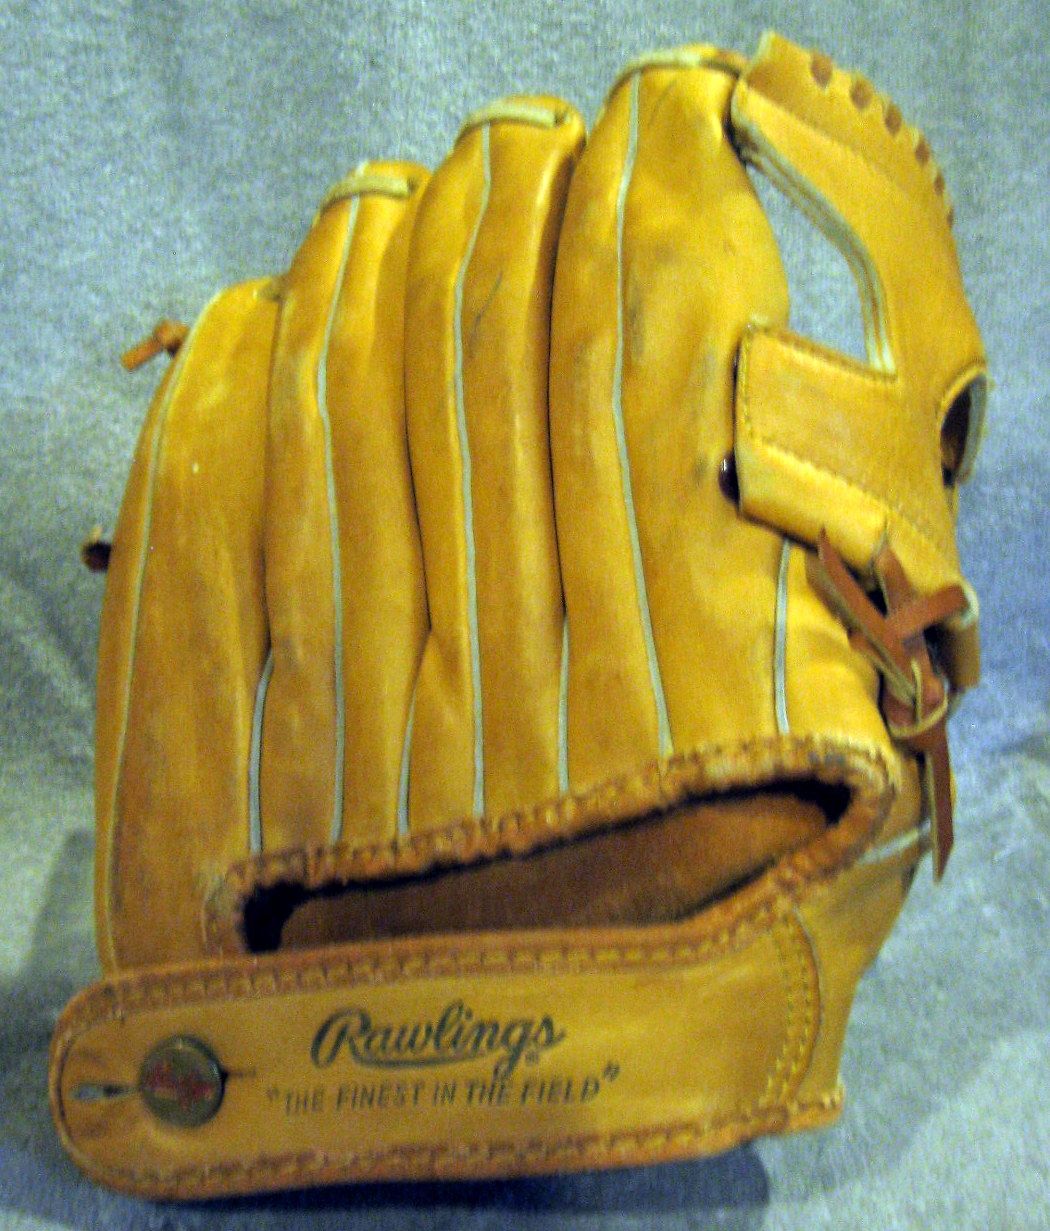 Mickey Mantle Signed Glove